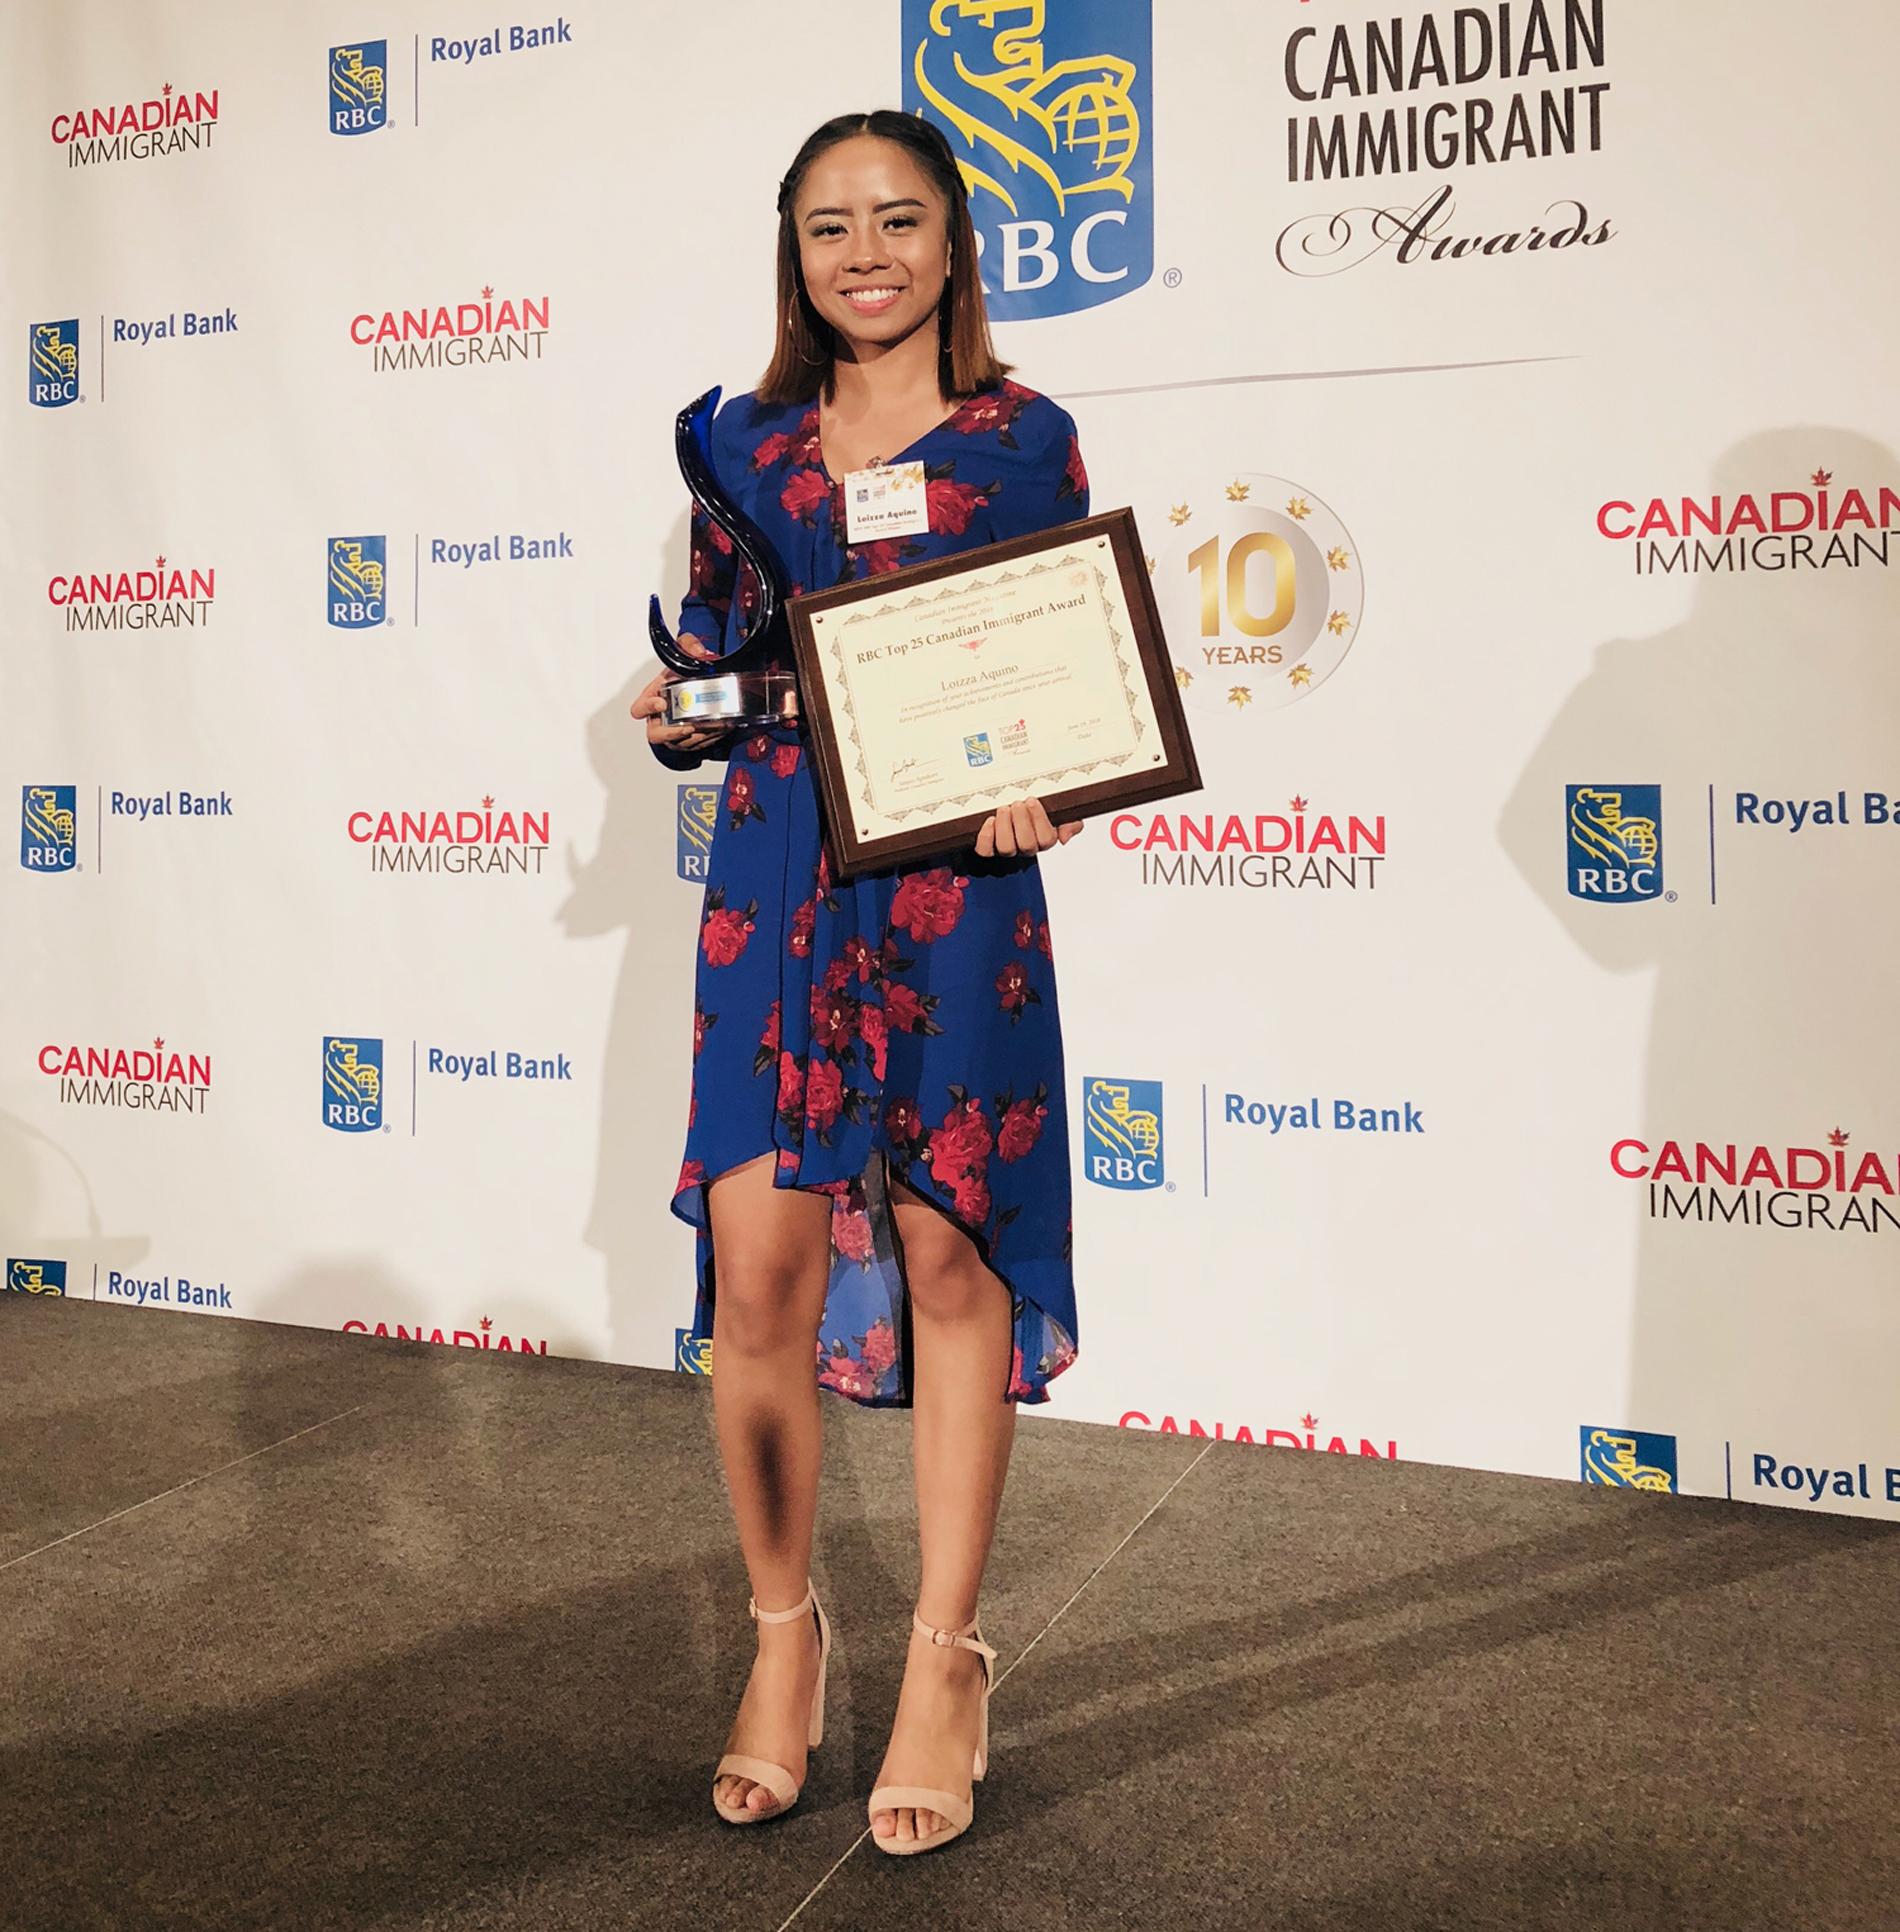 Student earns top immigrant award for work on student mental health